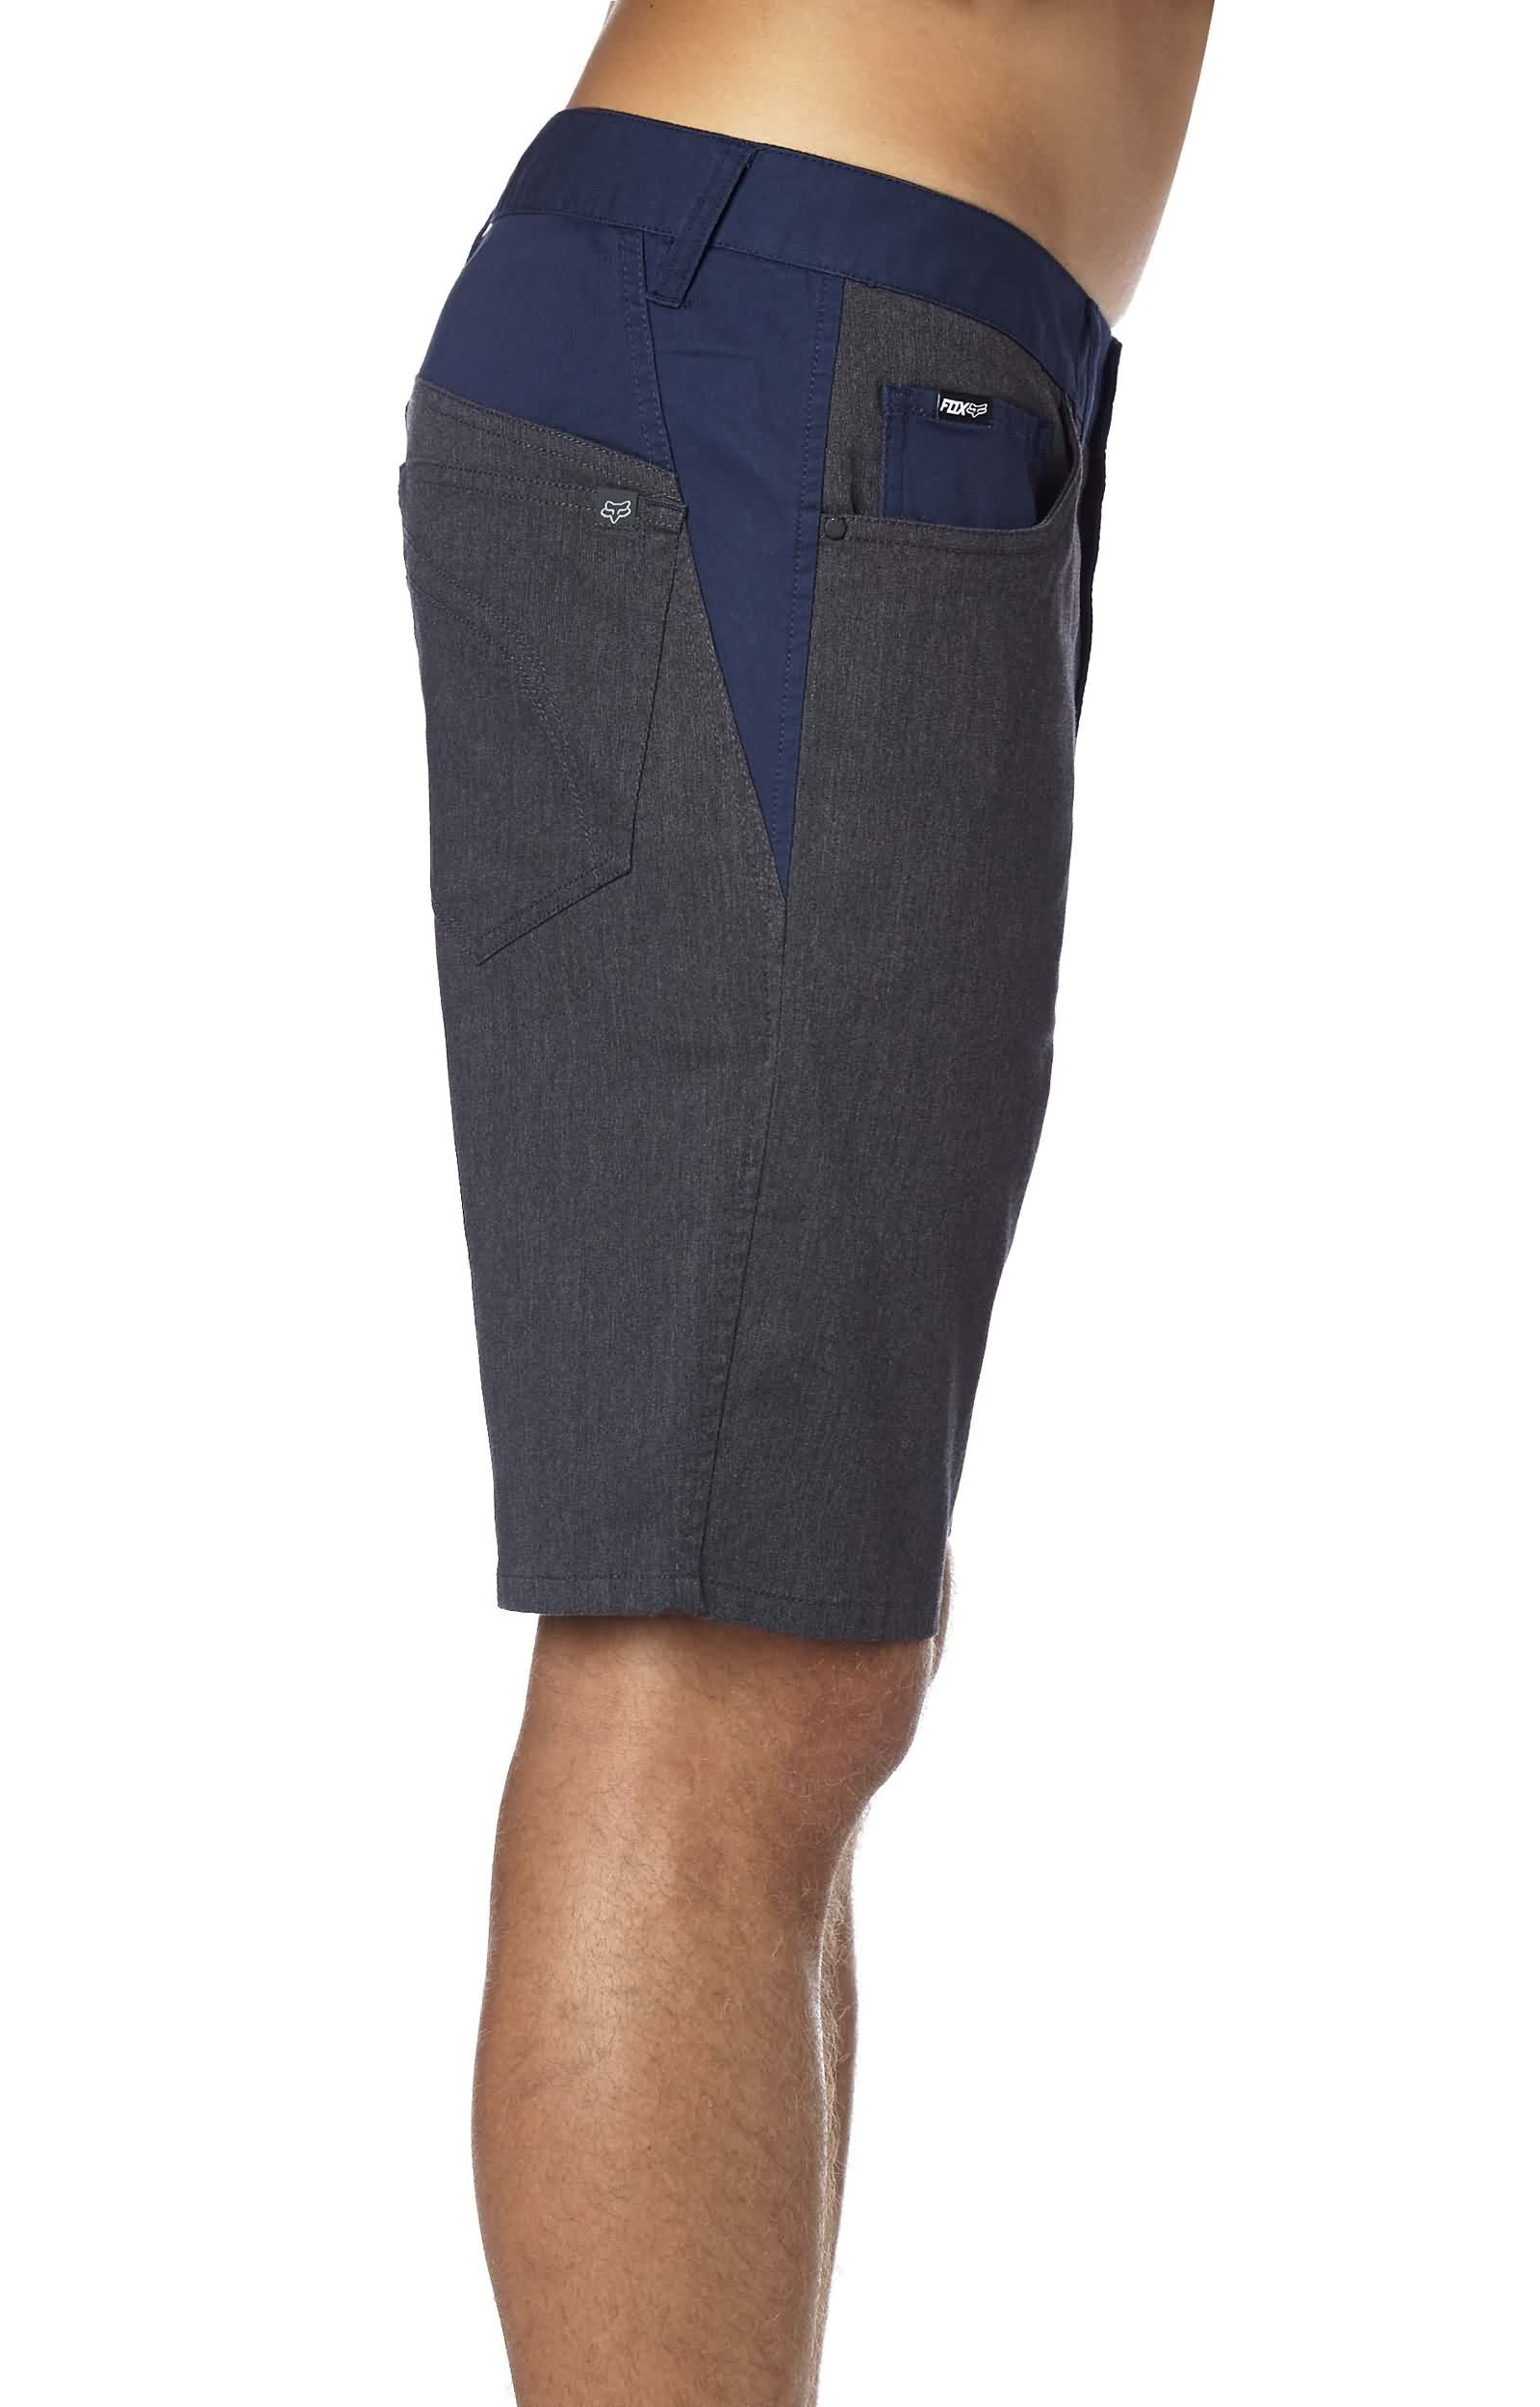 Fox Racing Summer 2016 Mens Lifestyle Shorts Collection